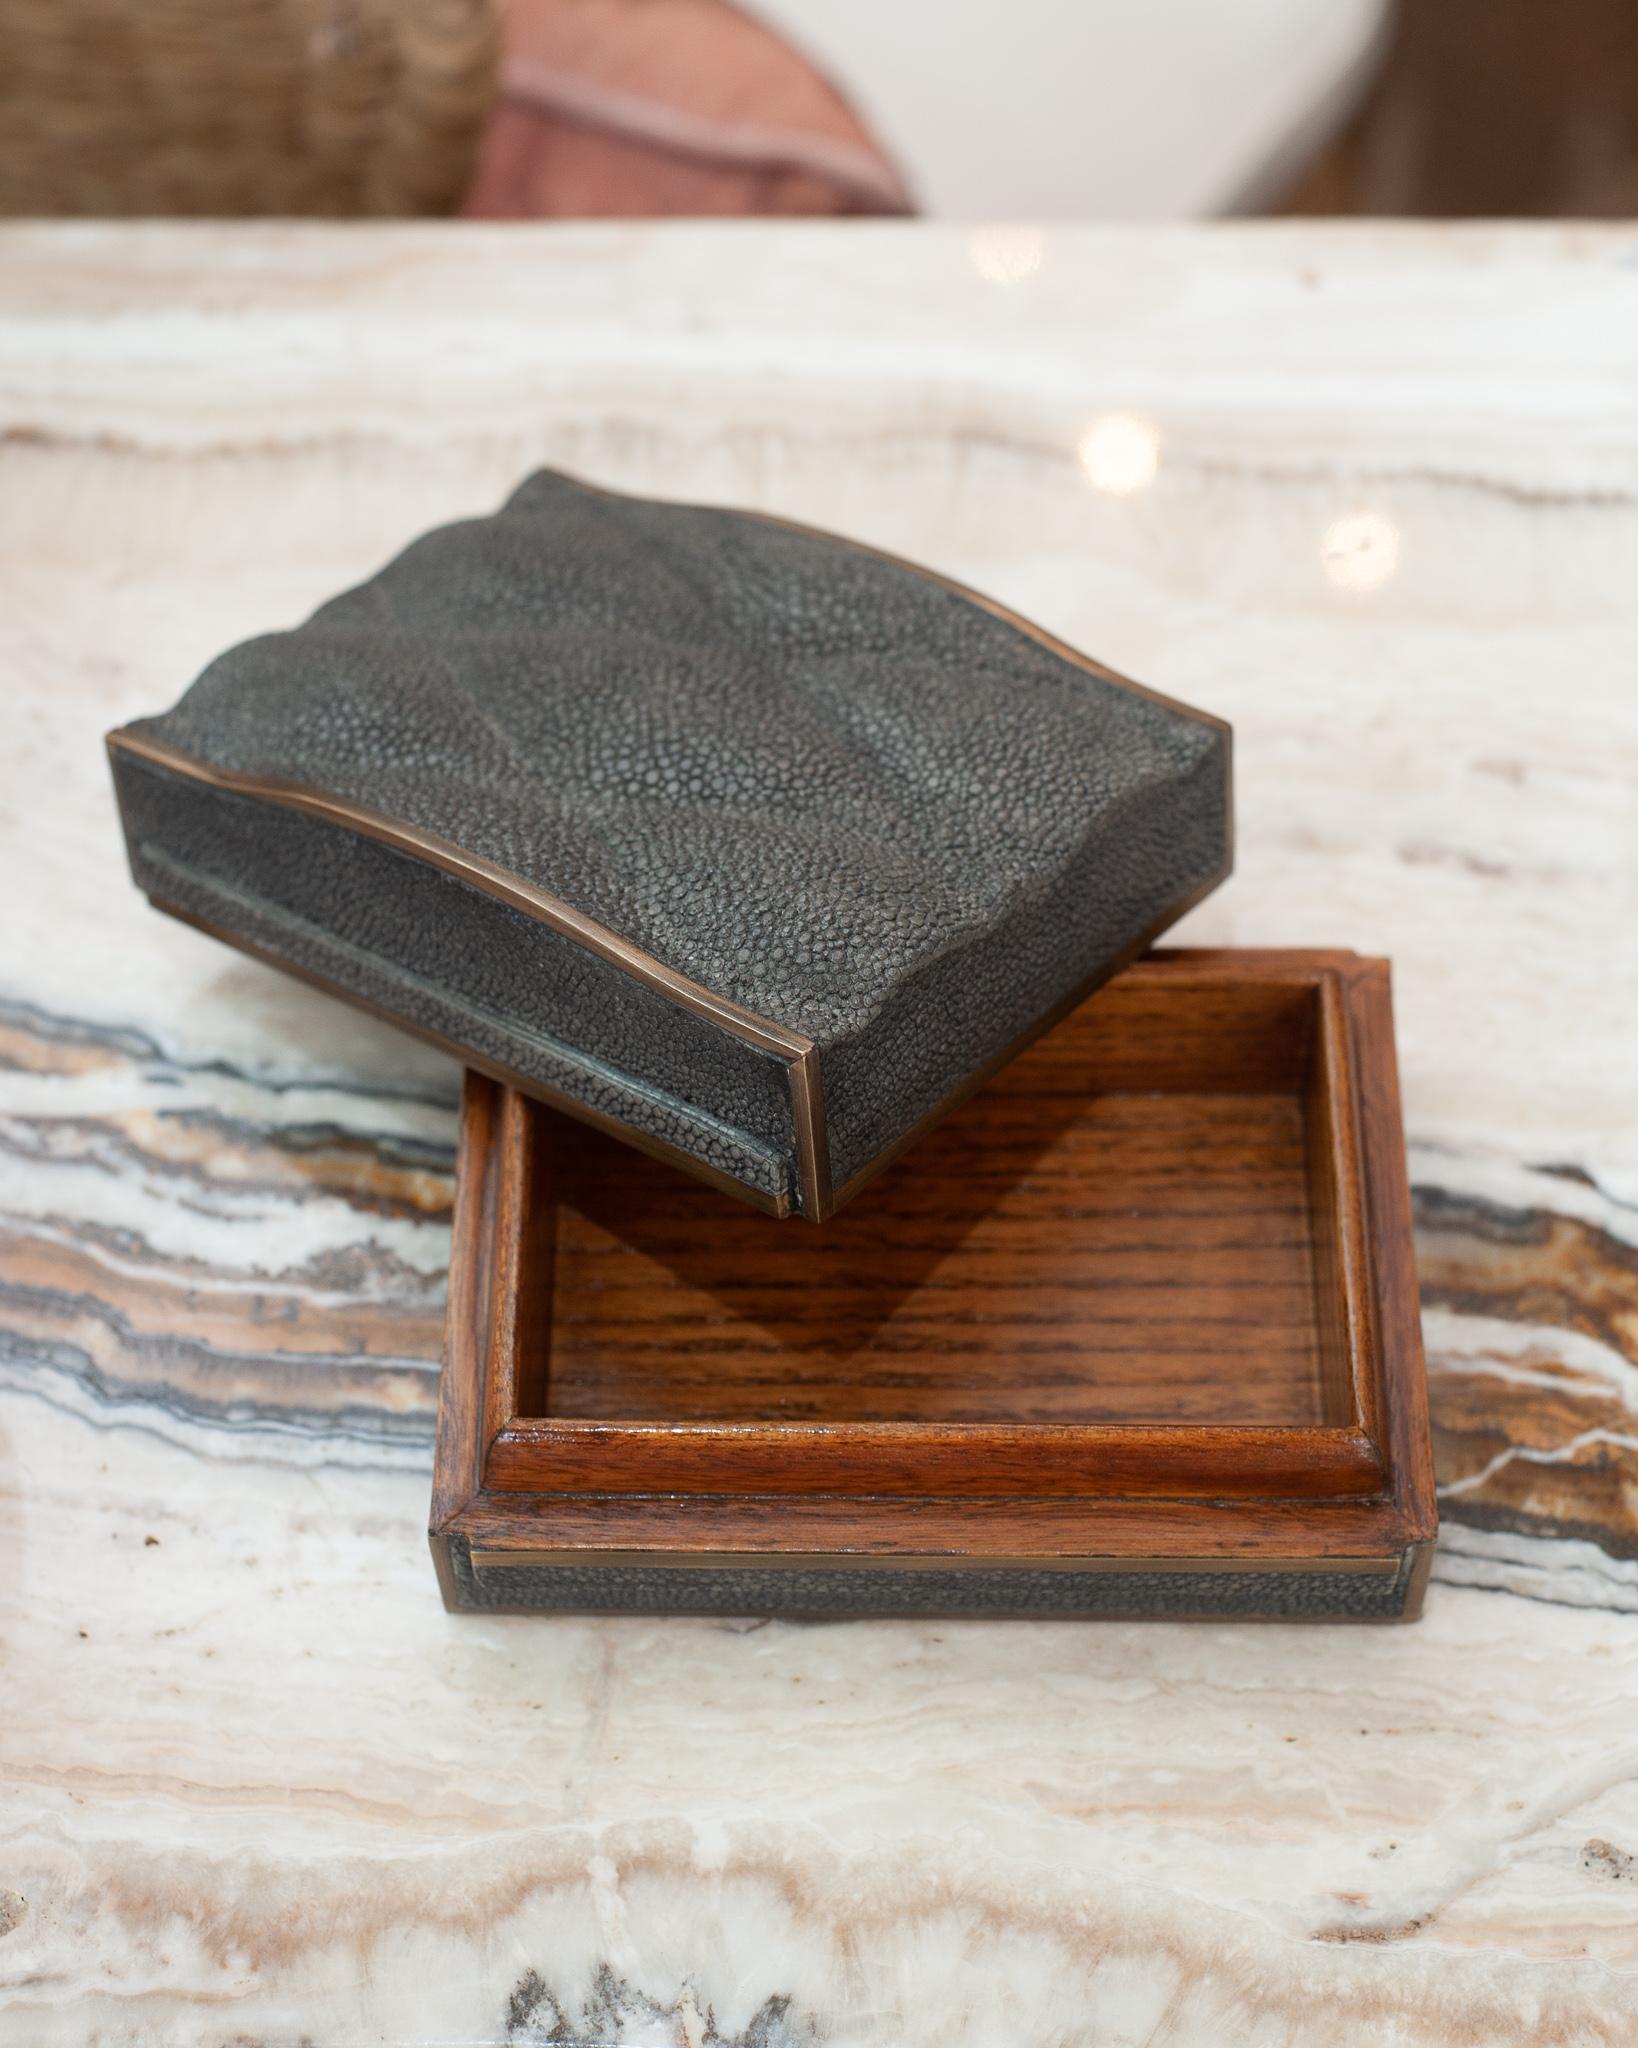 A beautiful charcoal shagreen quilted box by Kifu Paris. This natural skin piece is entirely handmade by master artisans to the highest quality, constructed from a base of walnut.